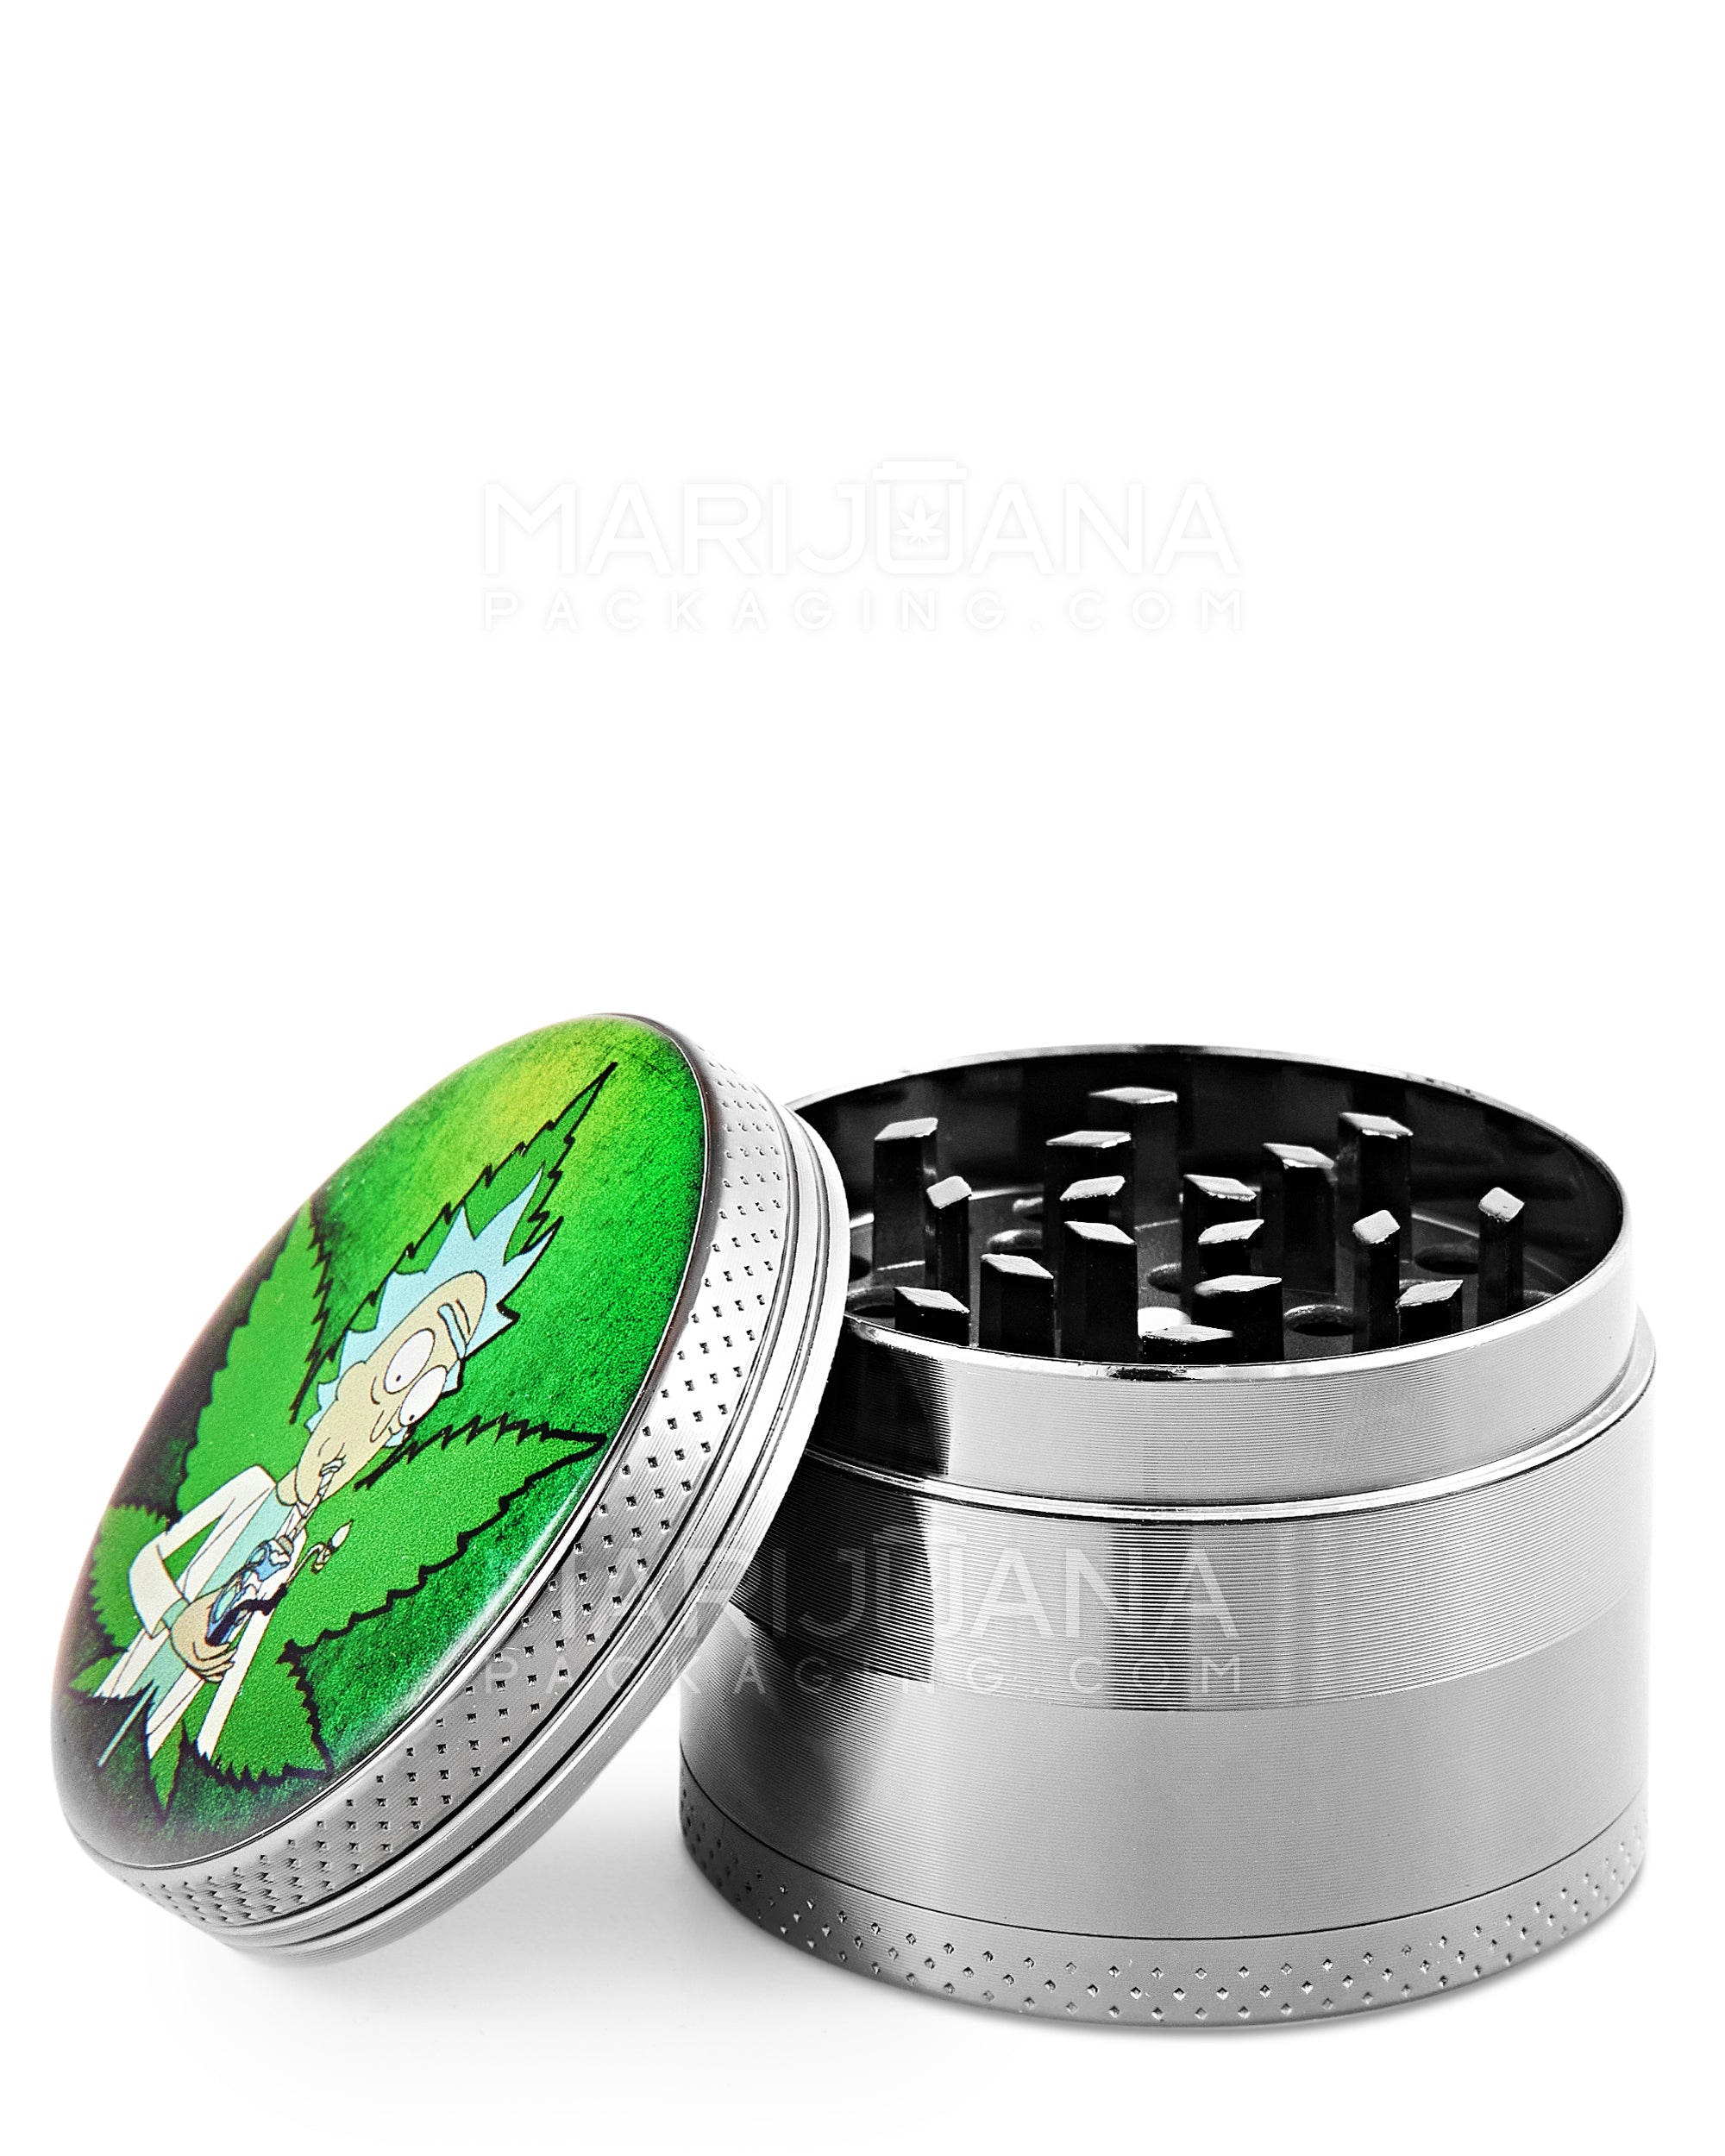 R&M Decal Magnetic Metal Grinder w/ Catcher | 4 Piece - 50mm - Assorted - 19